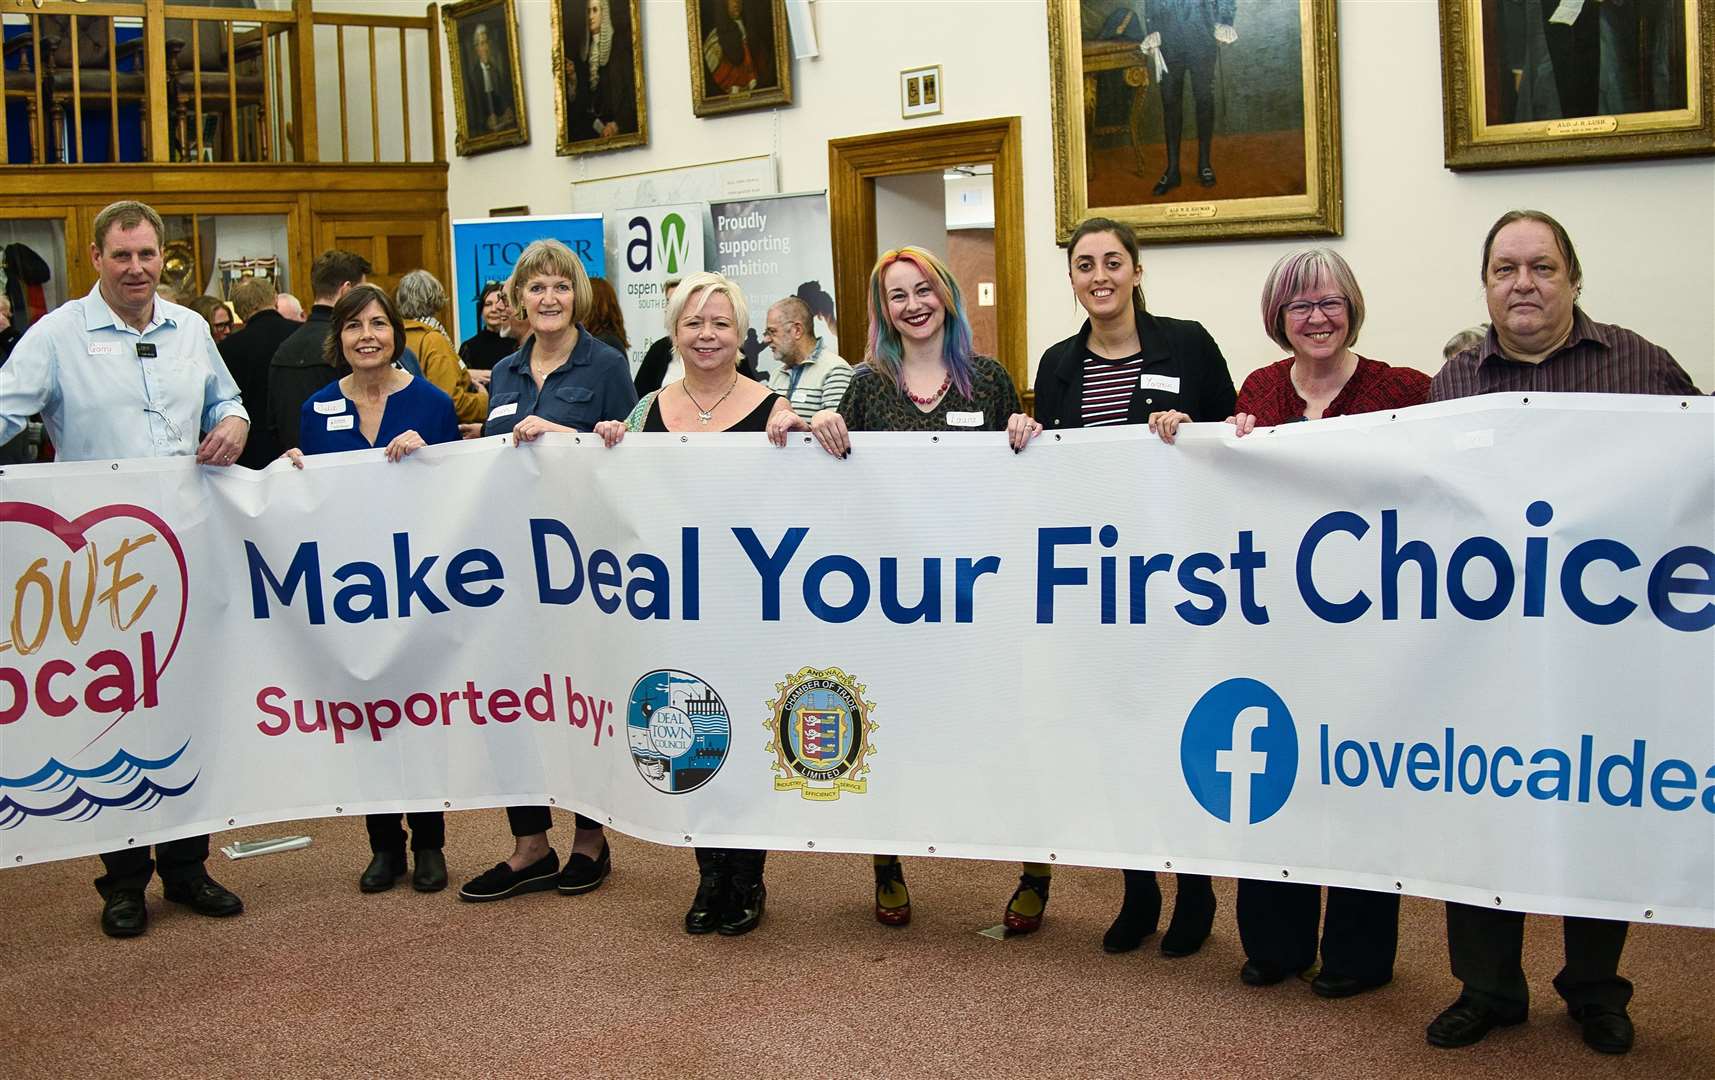 Members of the Love Local Deal steering group, left to right, are:Garry Kemp, Julie Kemp (both Tower Design and Print), Stephanie Hayman (Chequers Kitchen) Morag Turner (Deal Radio) Yasmin Barron, Love Local Deal’s social media executive, Laura Newing (Artistica hair salon) Cllr Sue Beer, Peter Davies (Deal and Walmer Chamber of Trade)